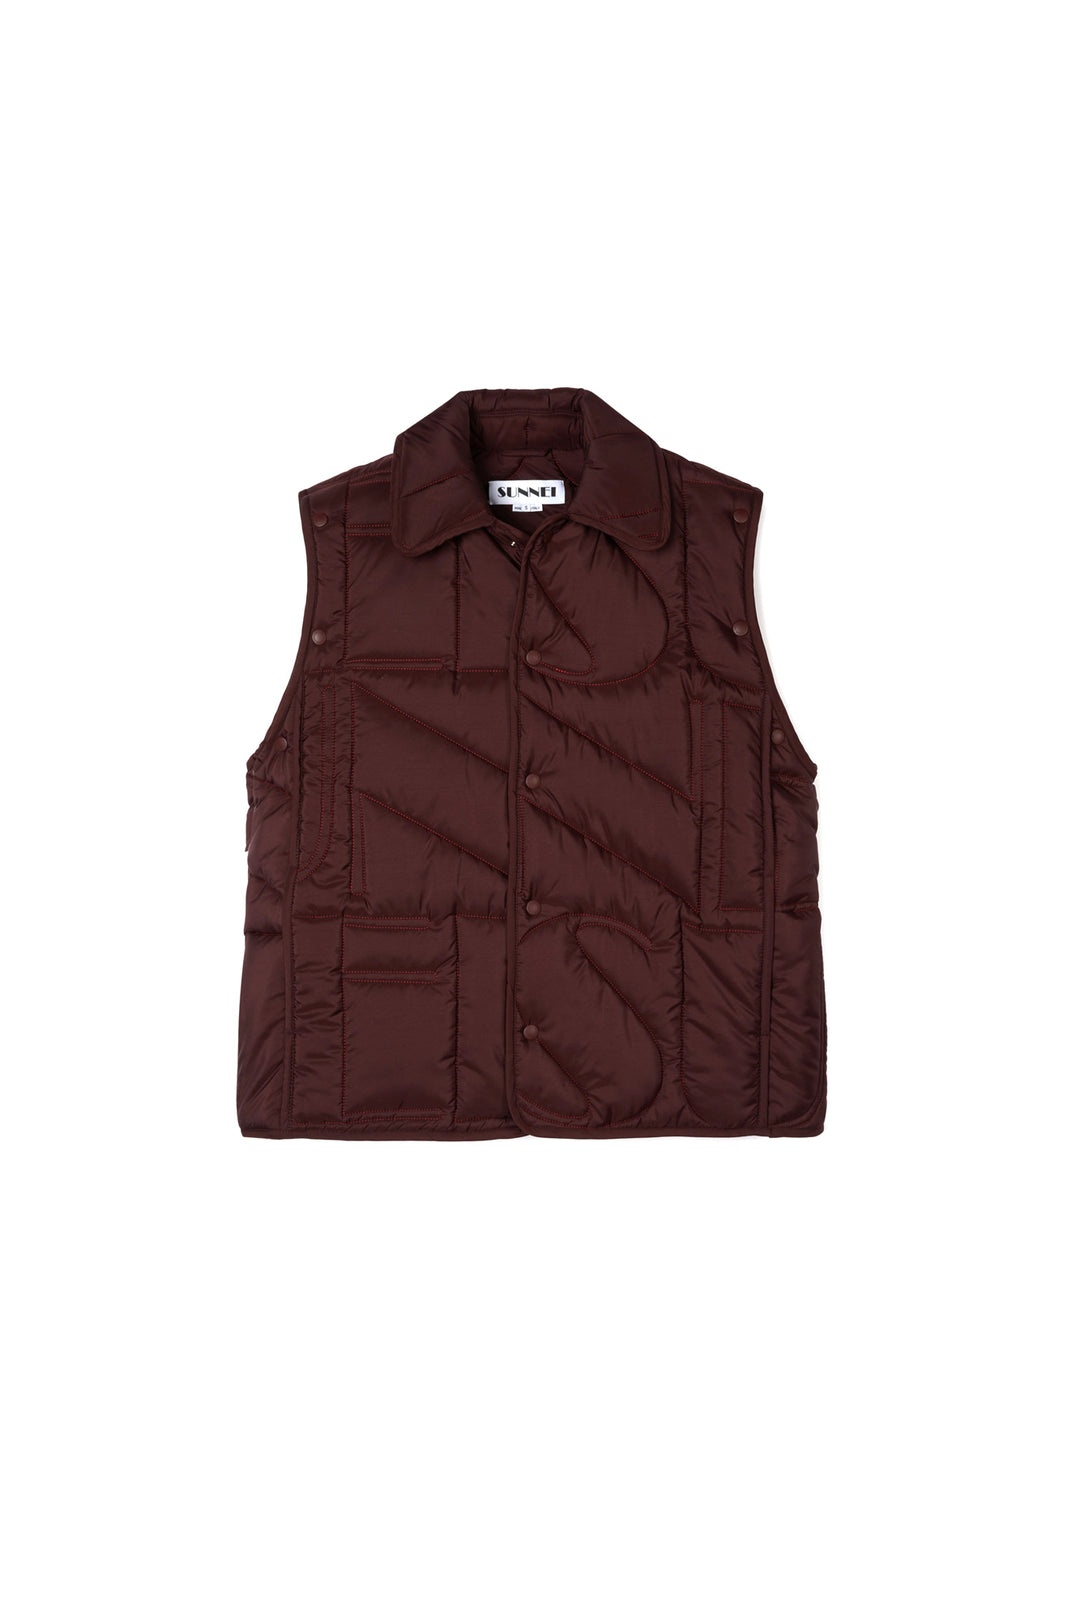 PADDED JACKET / maroon / embroidered allover logo - 3